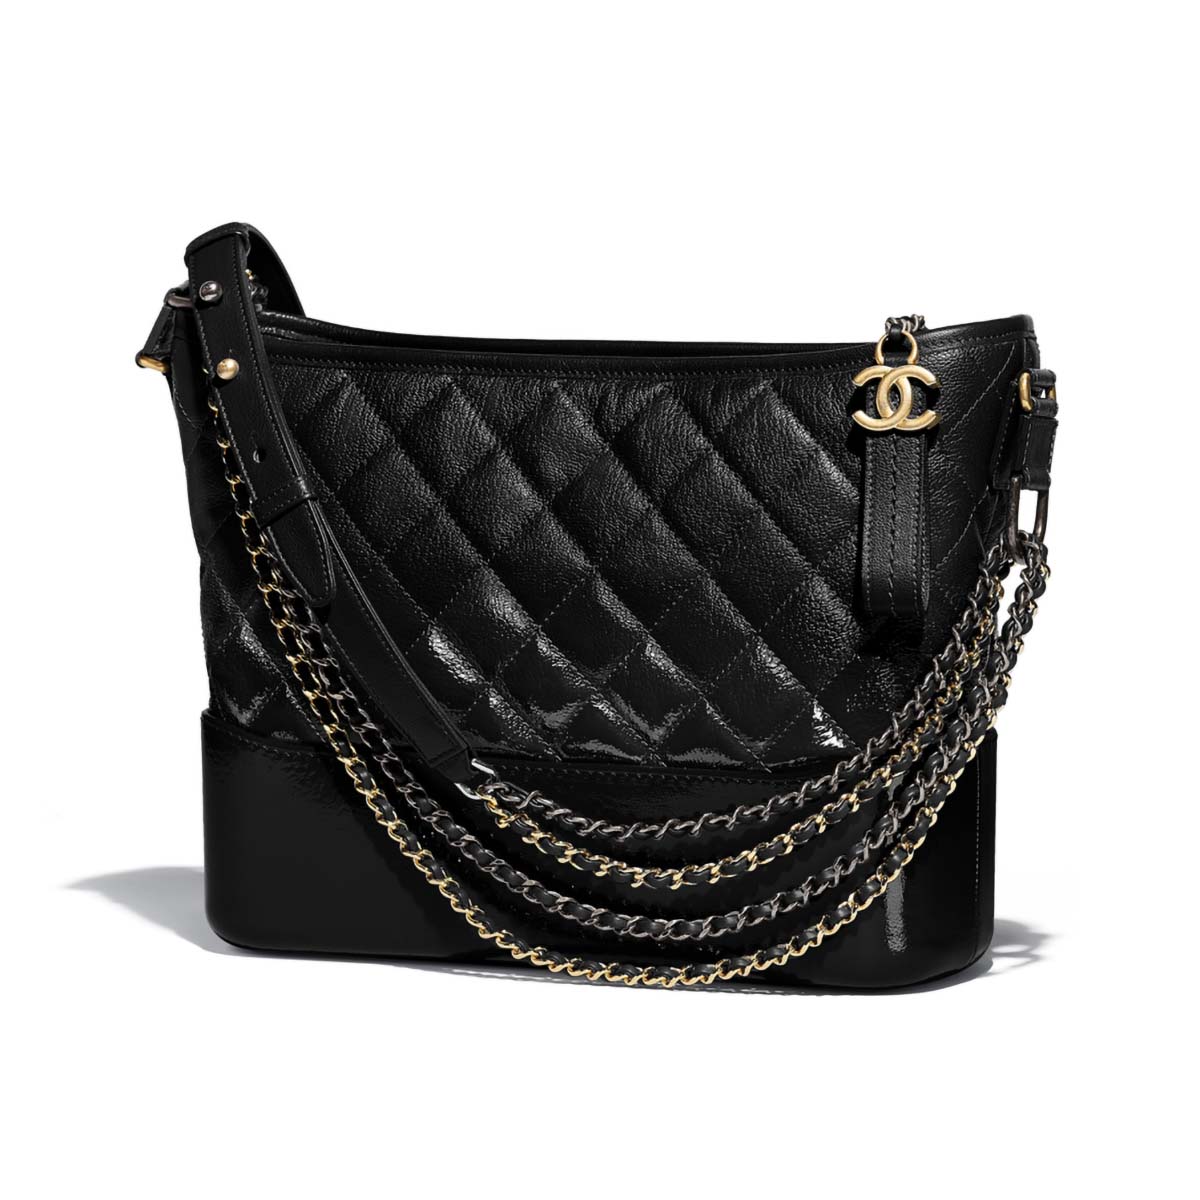 Chanel Gabrielle So Black small hobo bag in black chevron quilted calfskin.